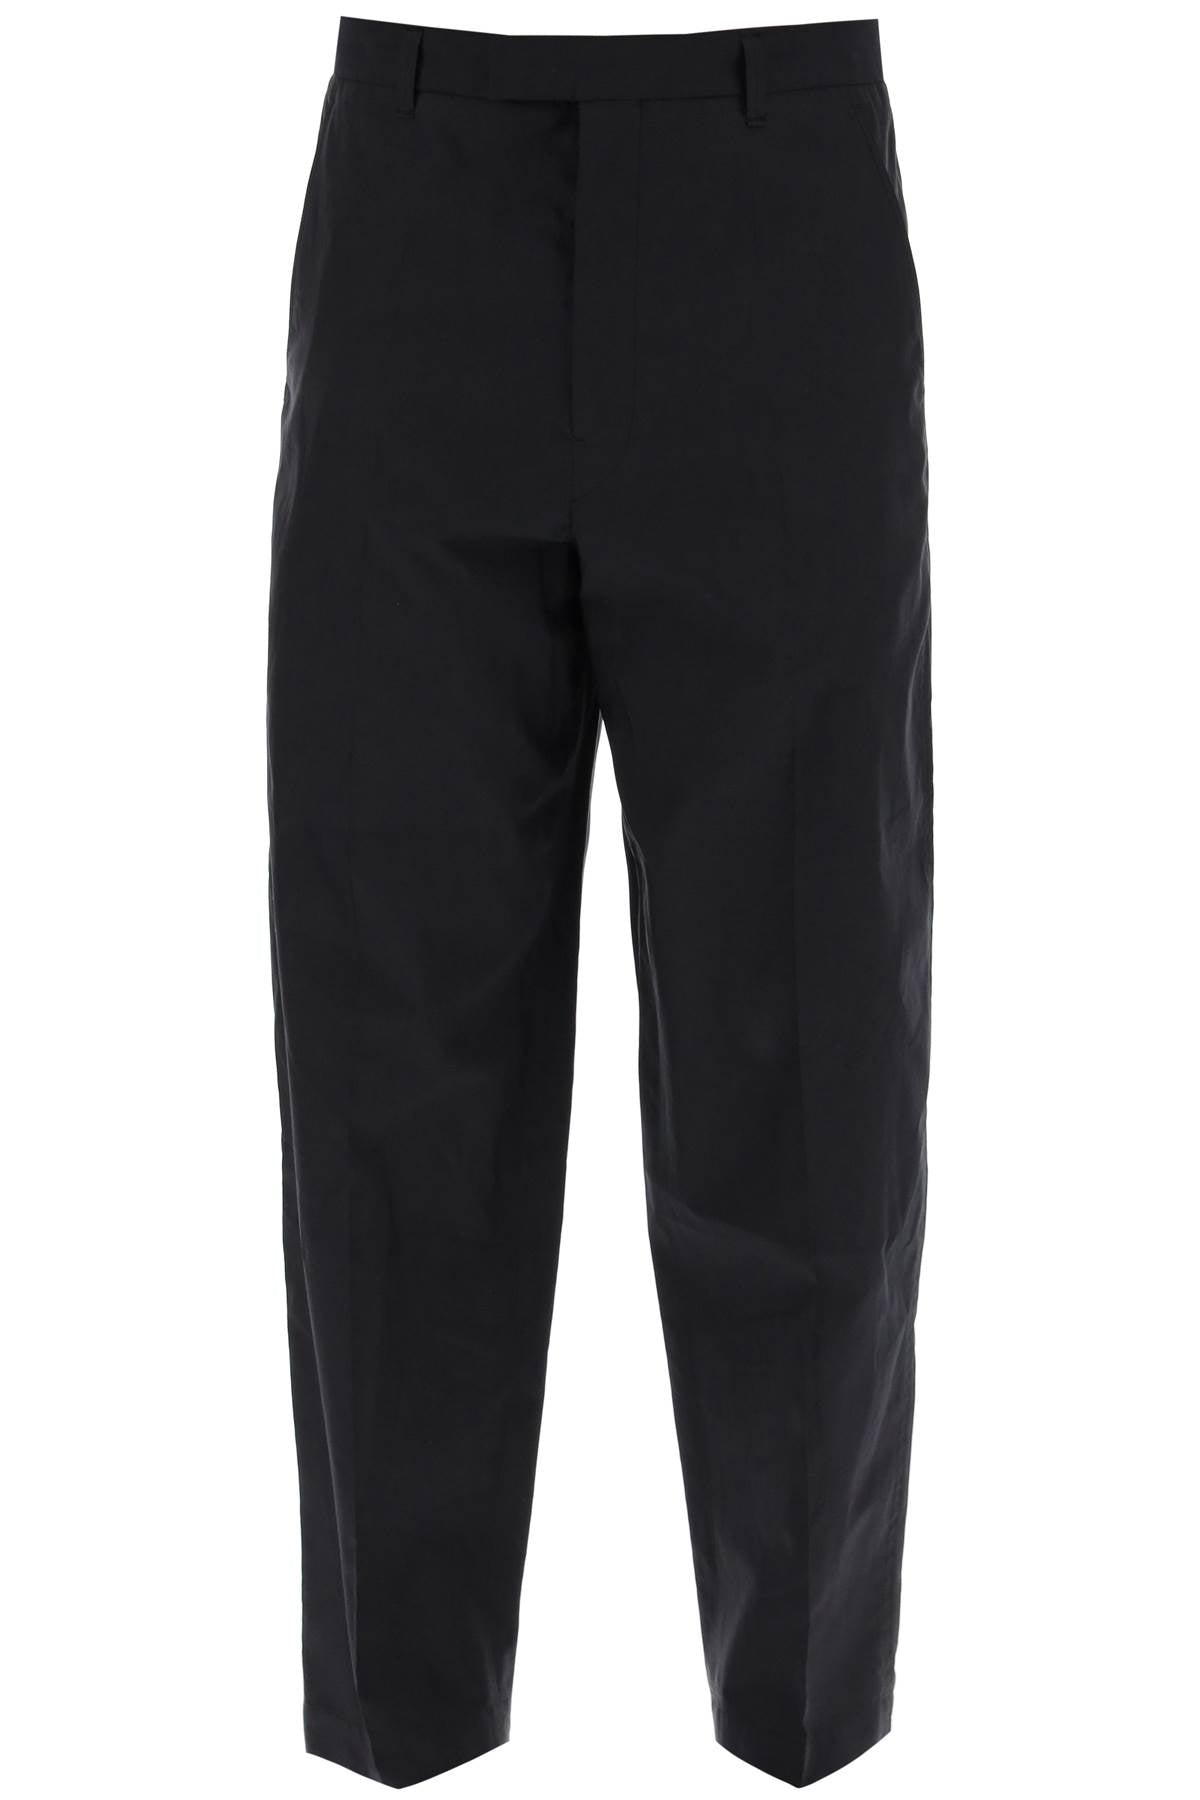 Lemaire cotton and silk carrot pants for men-0